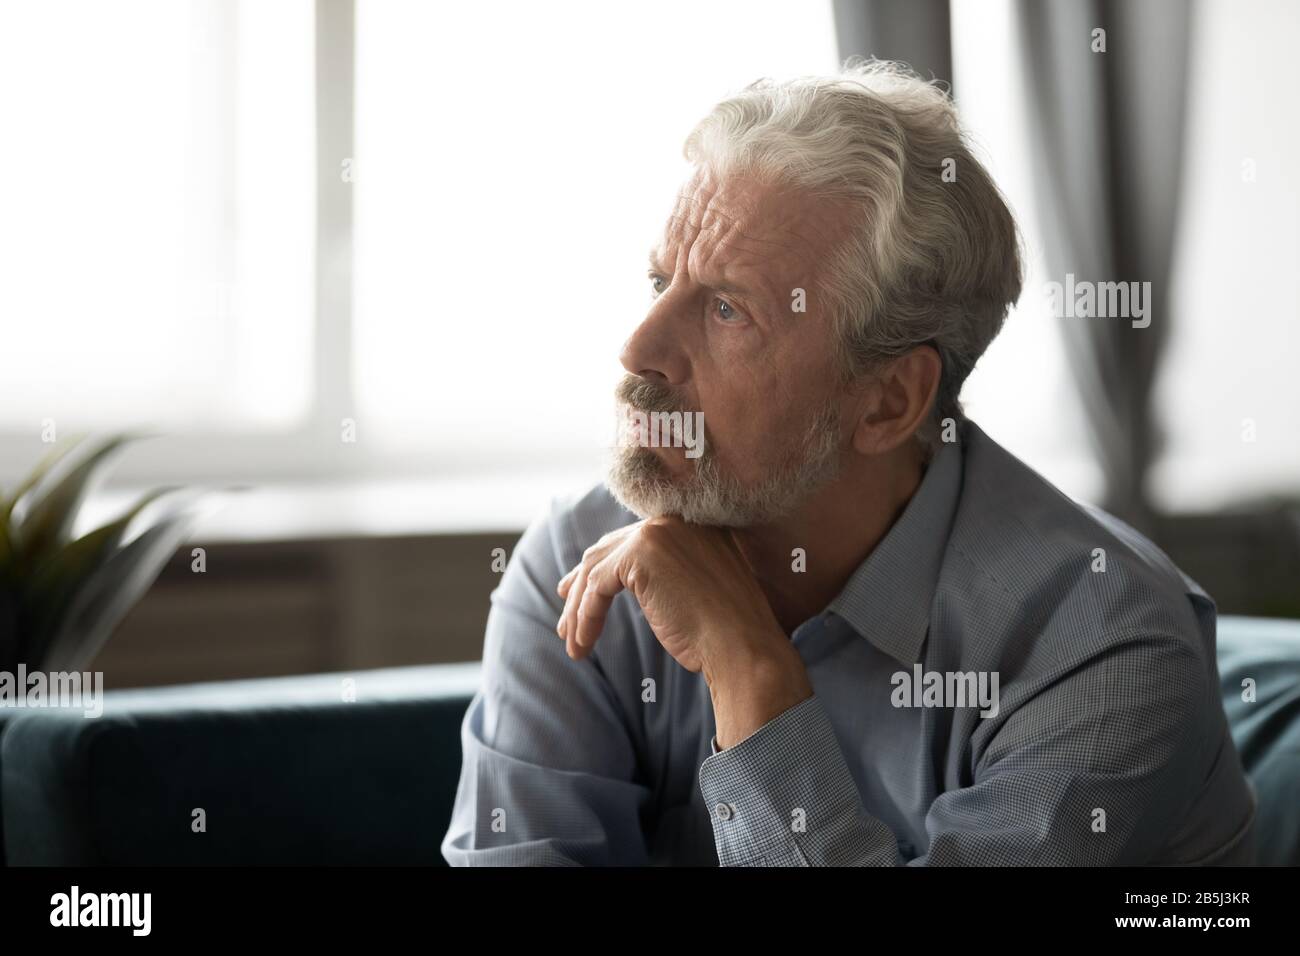 Depressed elderly man lost in thoughts mourning at home Stock Photo